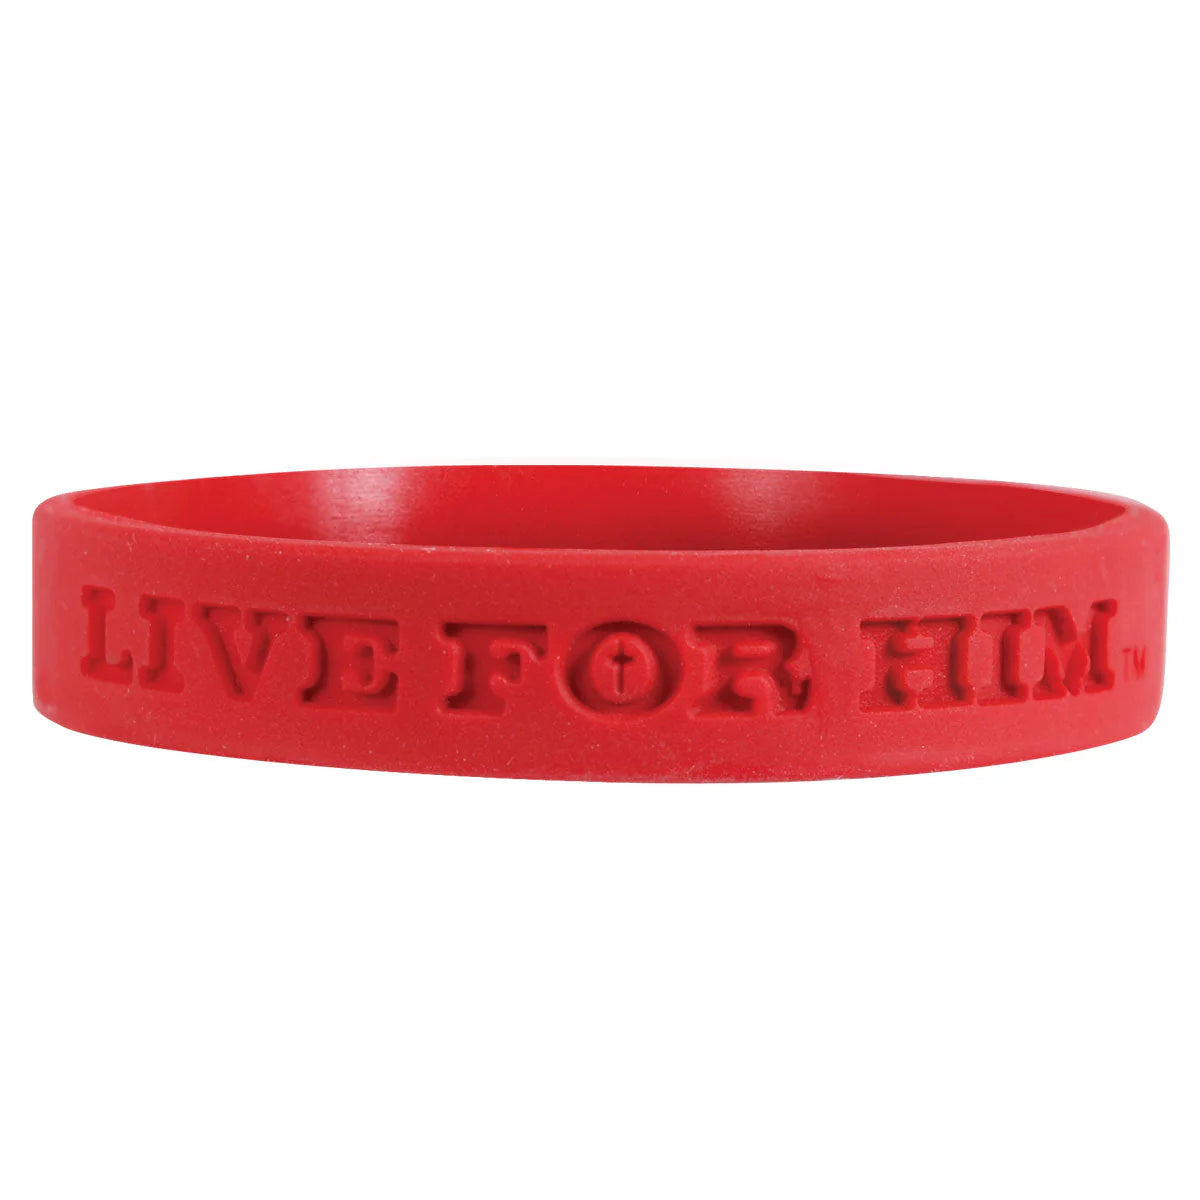 Kerusso Live For Him Rubber Wristband Kerusso® accessories jewelry Mens New